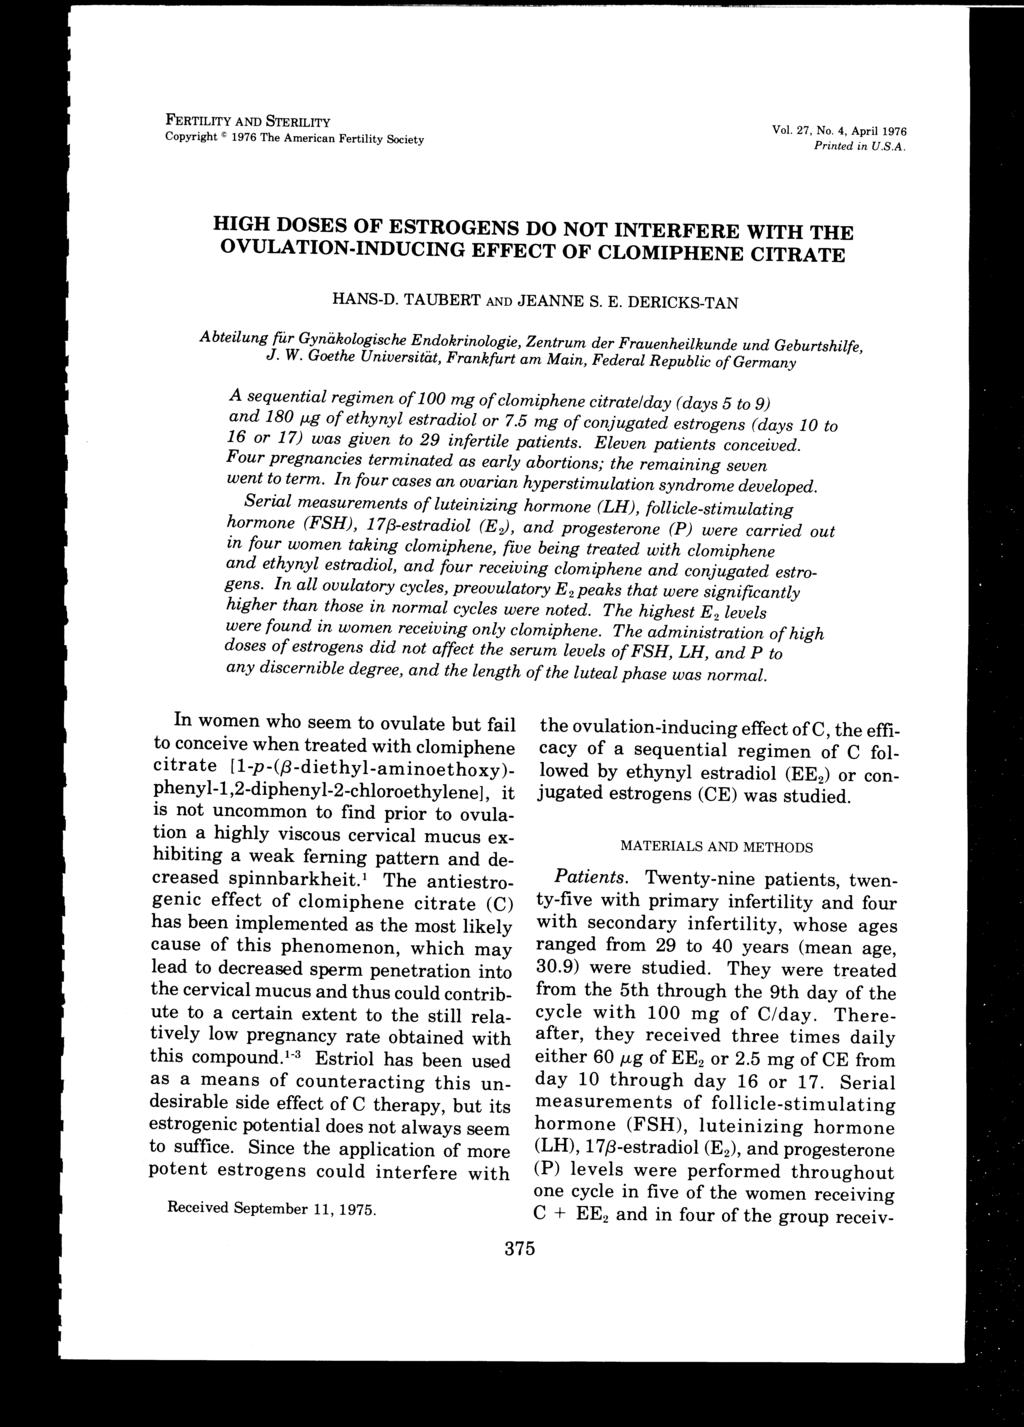 FERTILITY AND STERILITY Copyrght 1976 The Amercan Fertlty Socety Vol. 27, No.4, Aprl 1976 Prnted n U.S.A. HIGH DOSES OF ESTROGENS DO NOT INTERFERE WITH THE OVULATION-INDUCING EFFECT OF CLOMIPHENE CITRATE HANS-D.